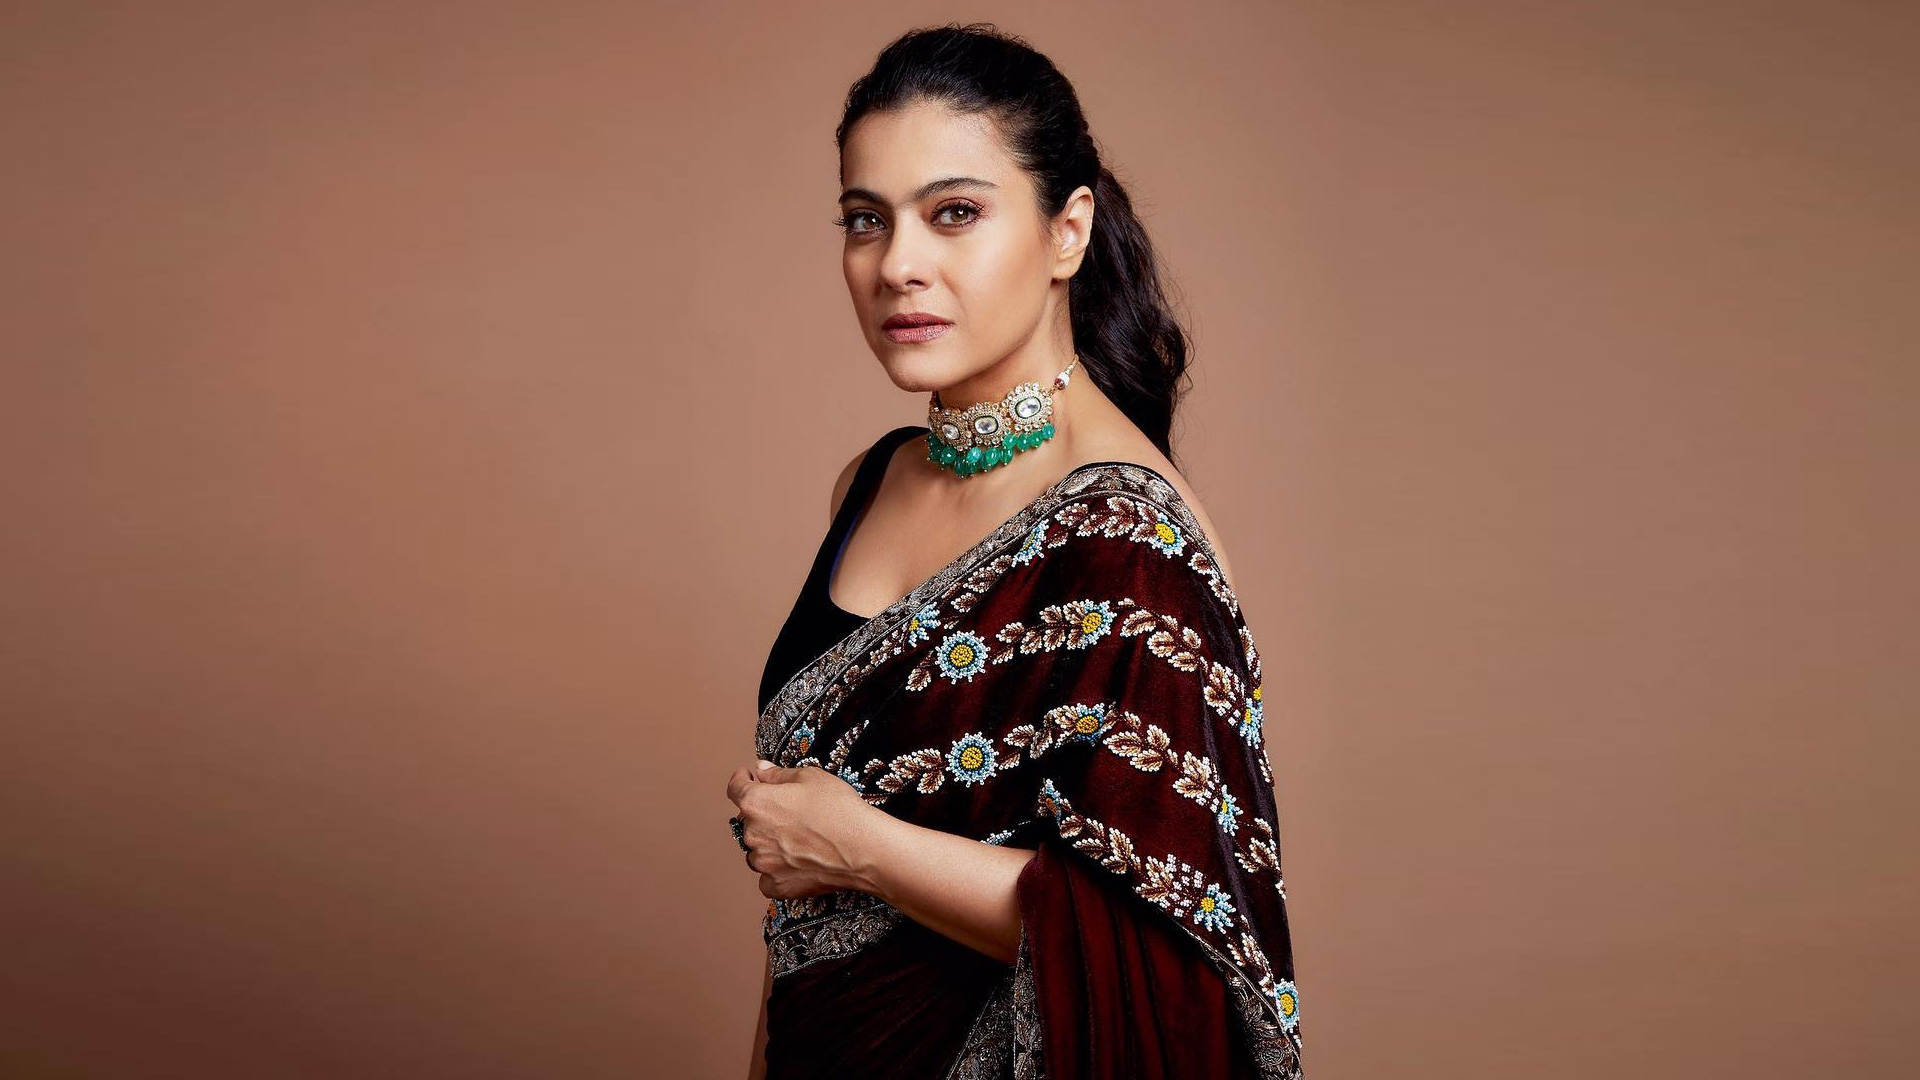 Which is Kajol's movie?